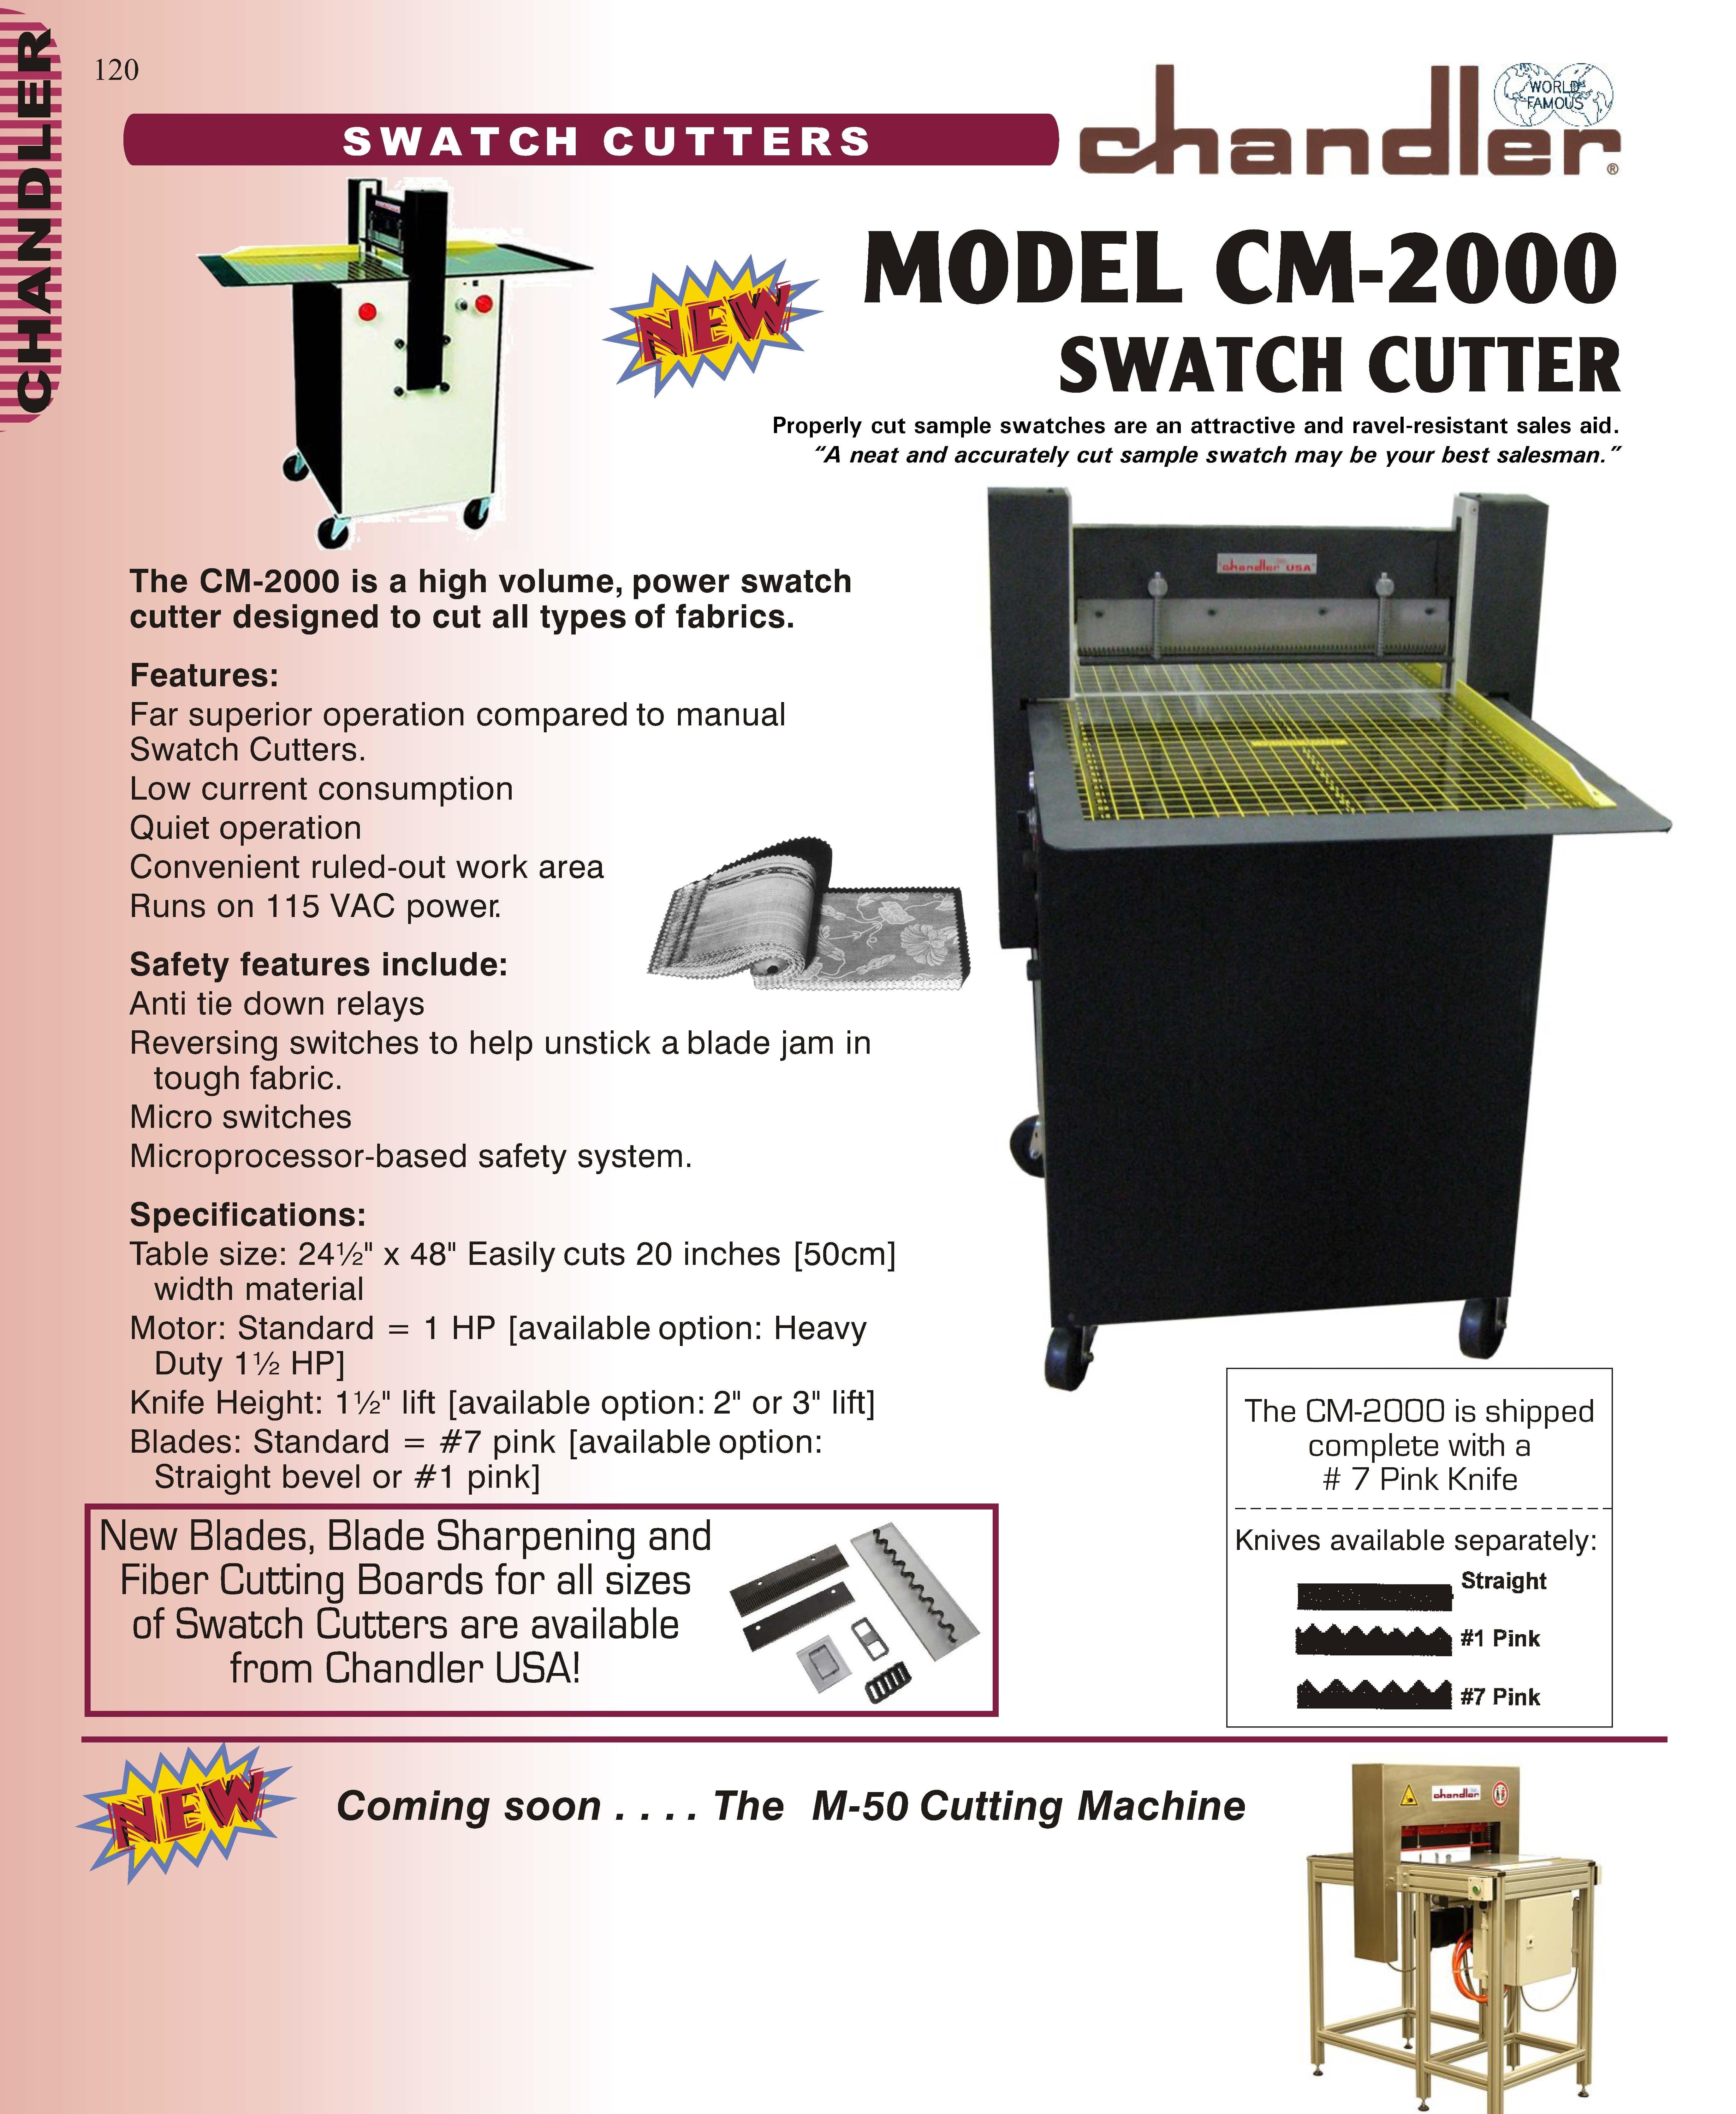 CHANDLER CM-2000 HIGH VOLUME SWATCH CUTTER
and PANTS PINKER